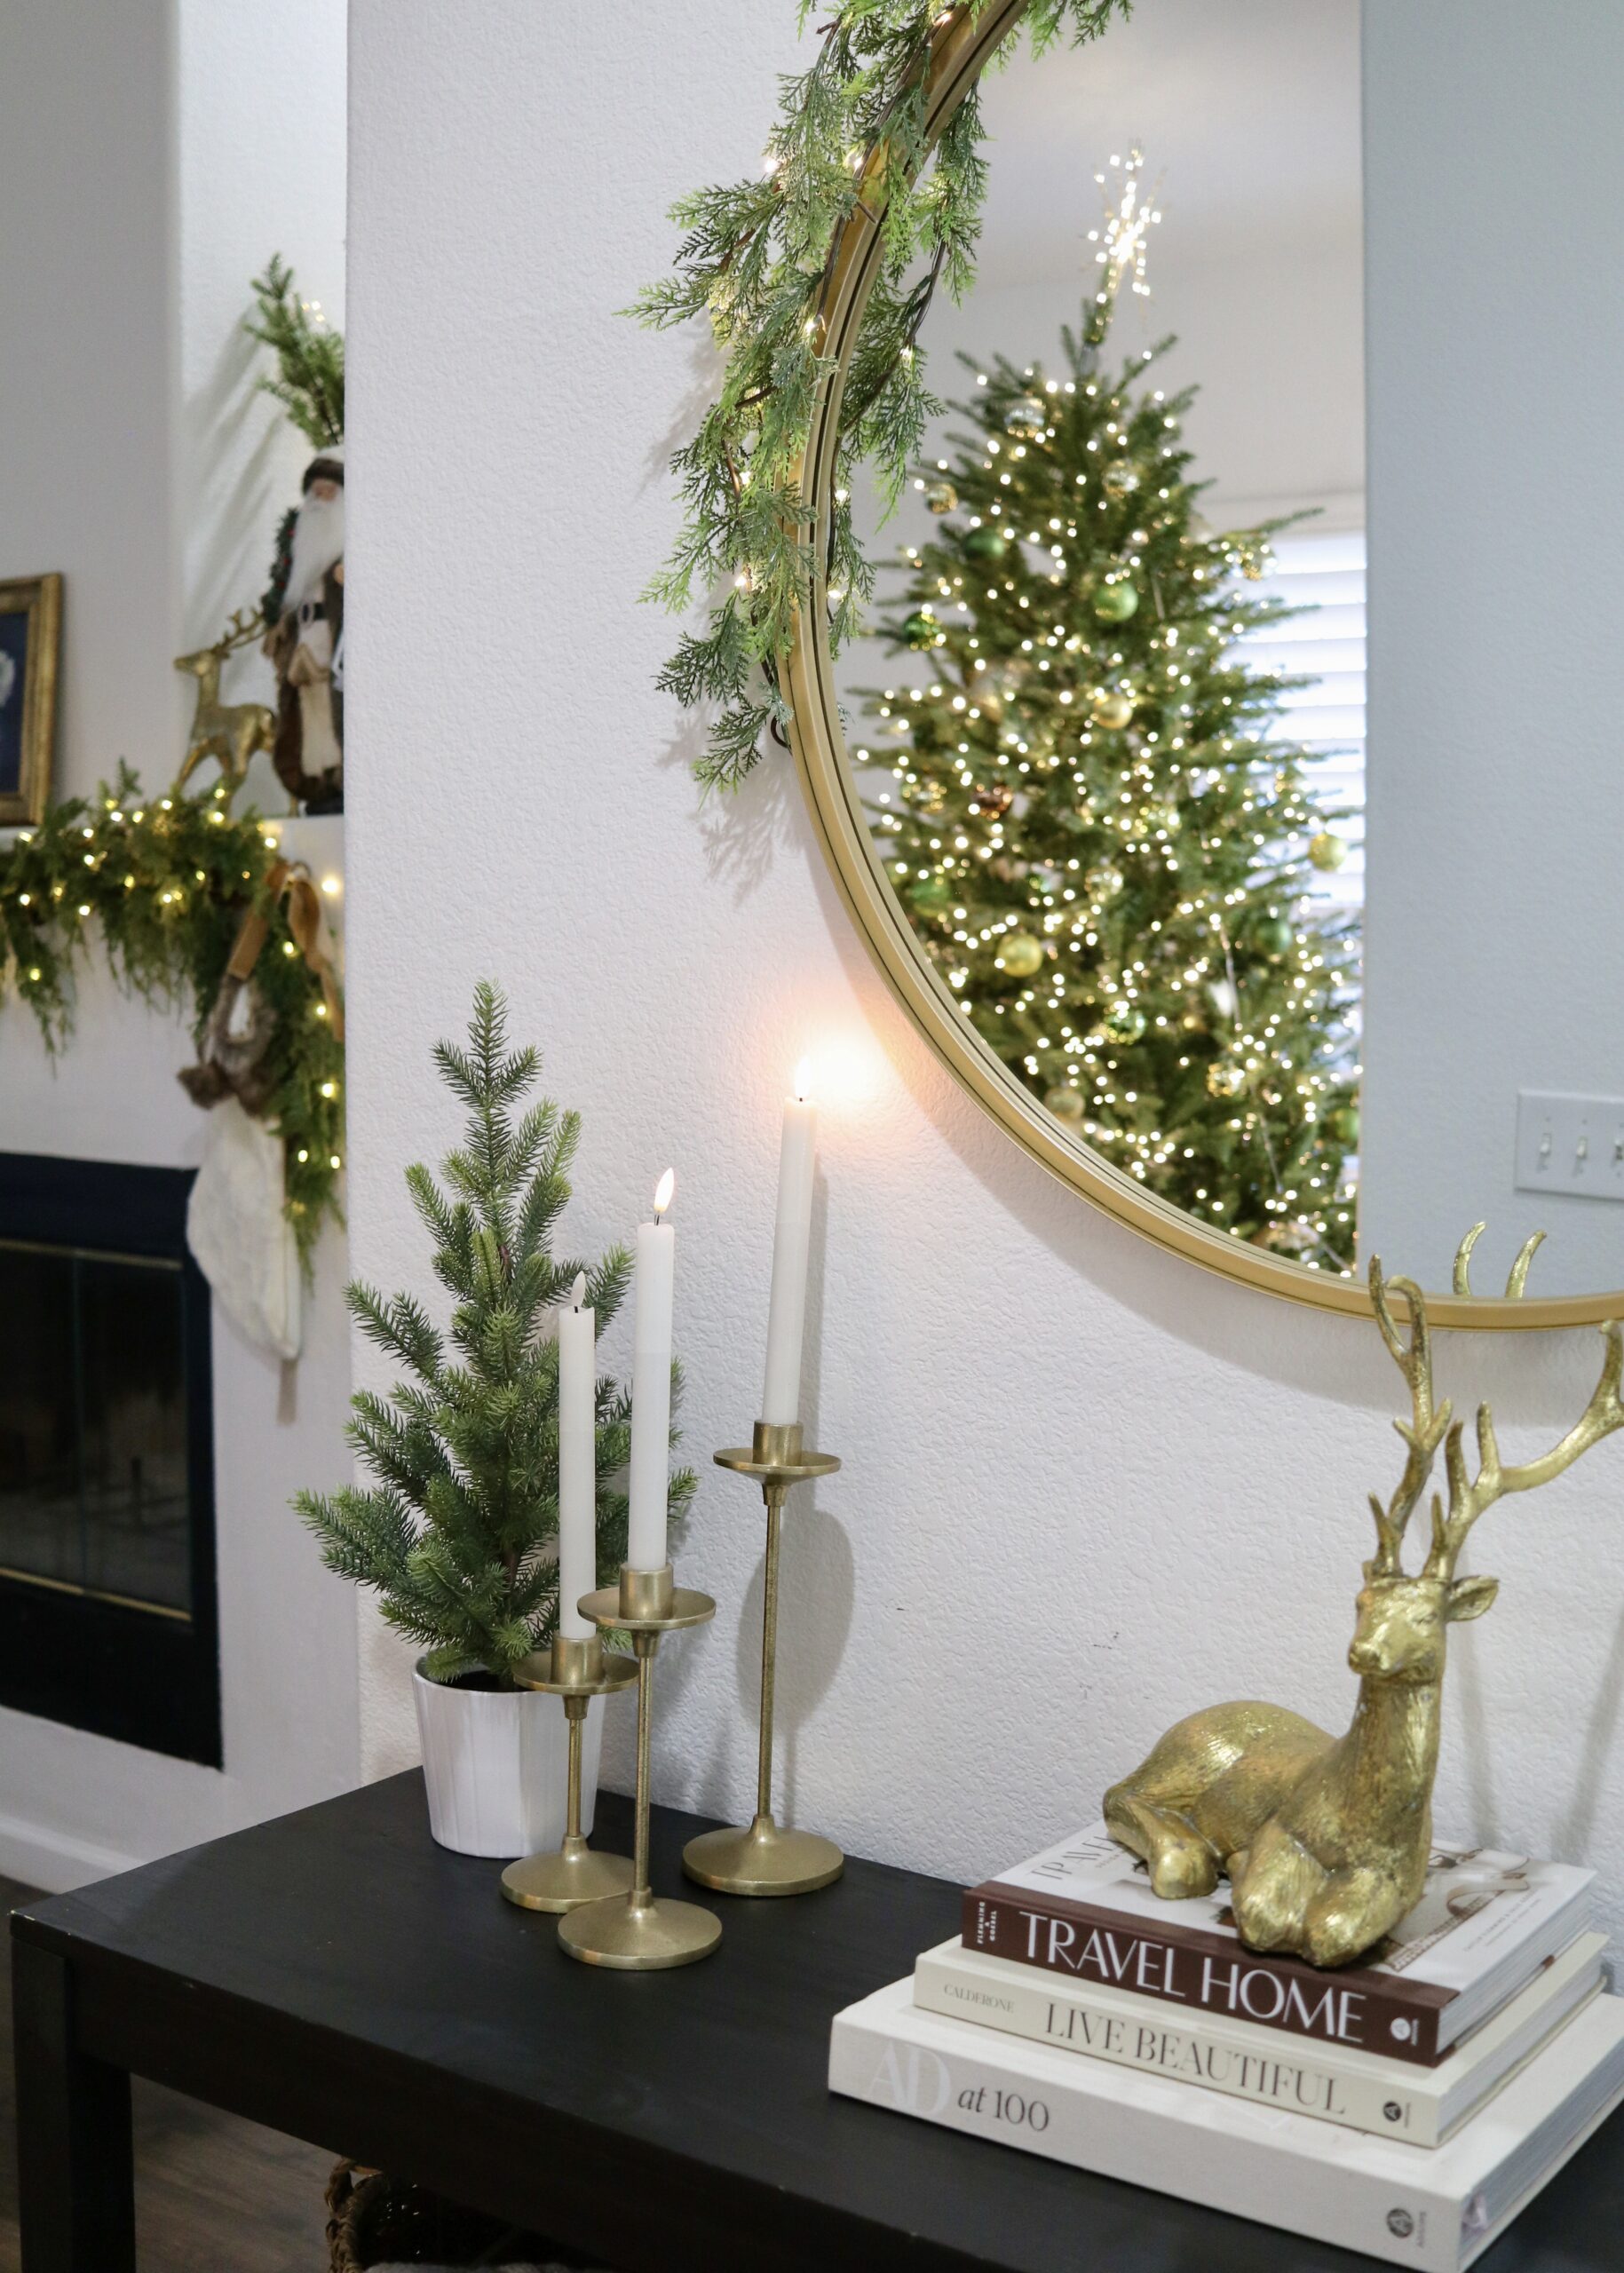 elegant and festive holiday decor for the entryway, flameless candles for the holidays